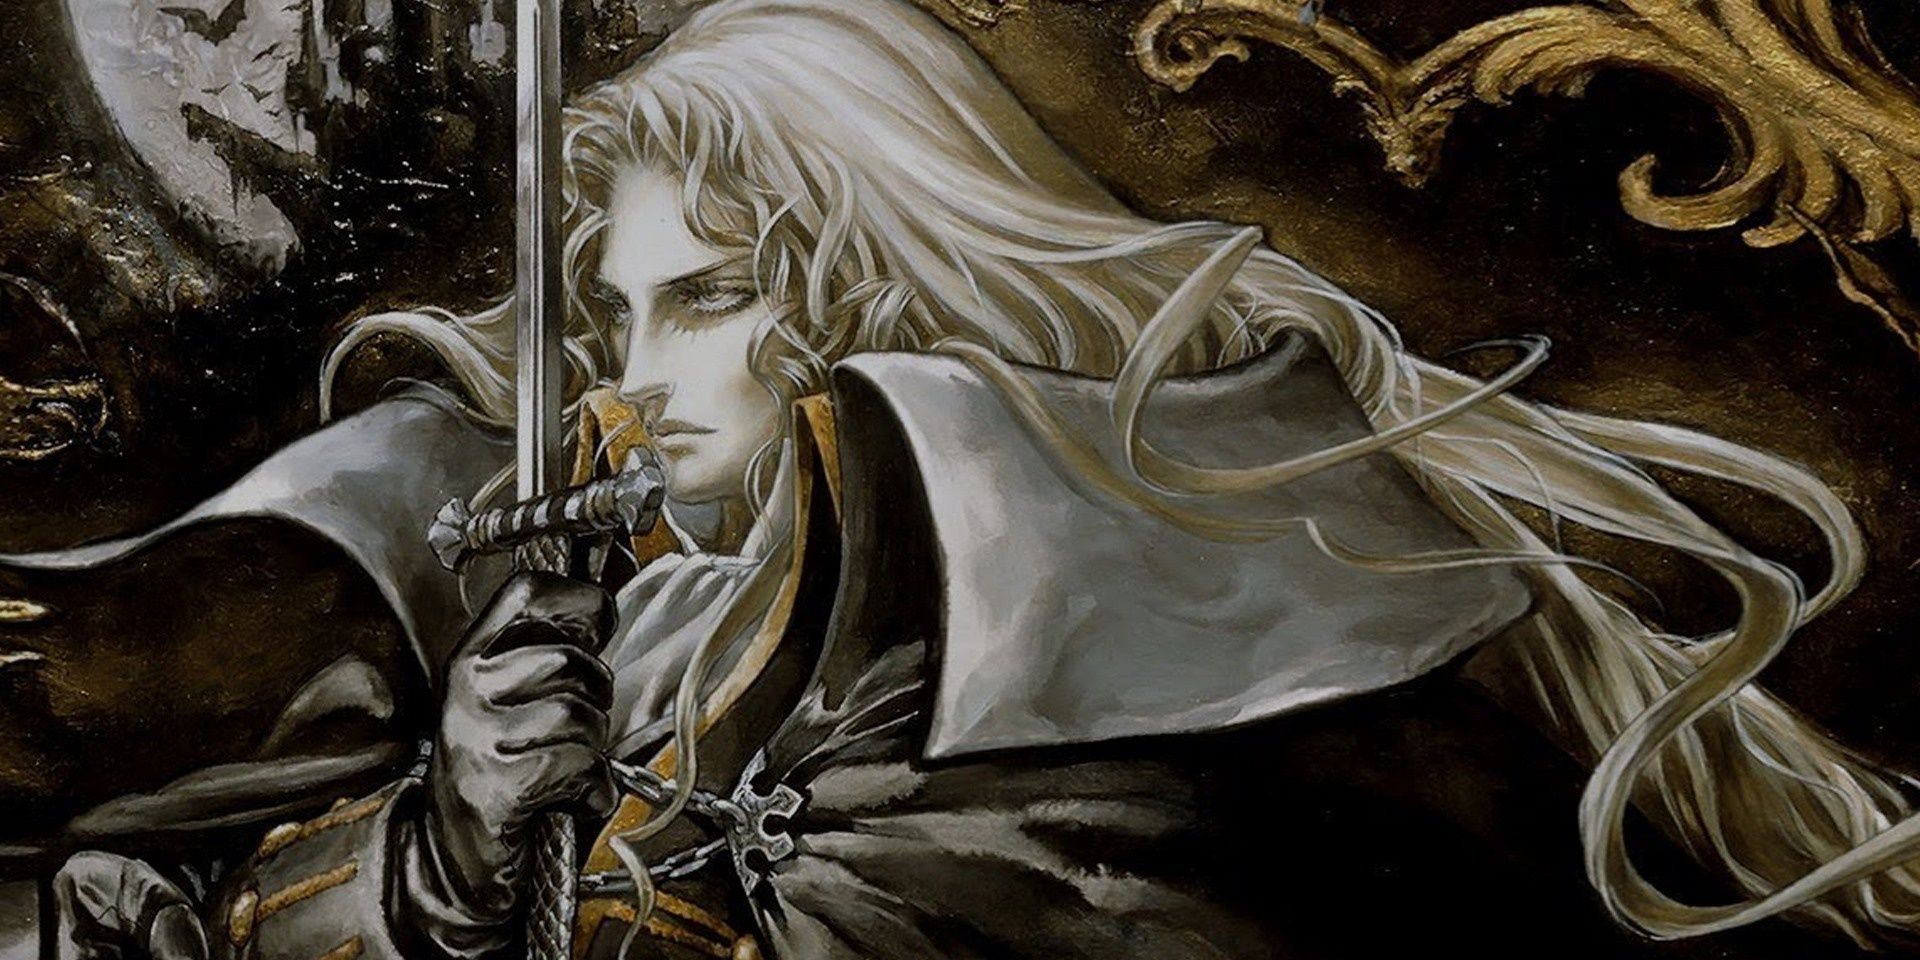 10 Things From The Games That Should Make It Into Castlevania Season 4